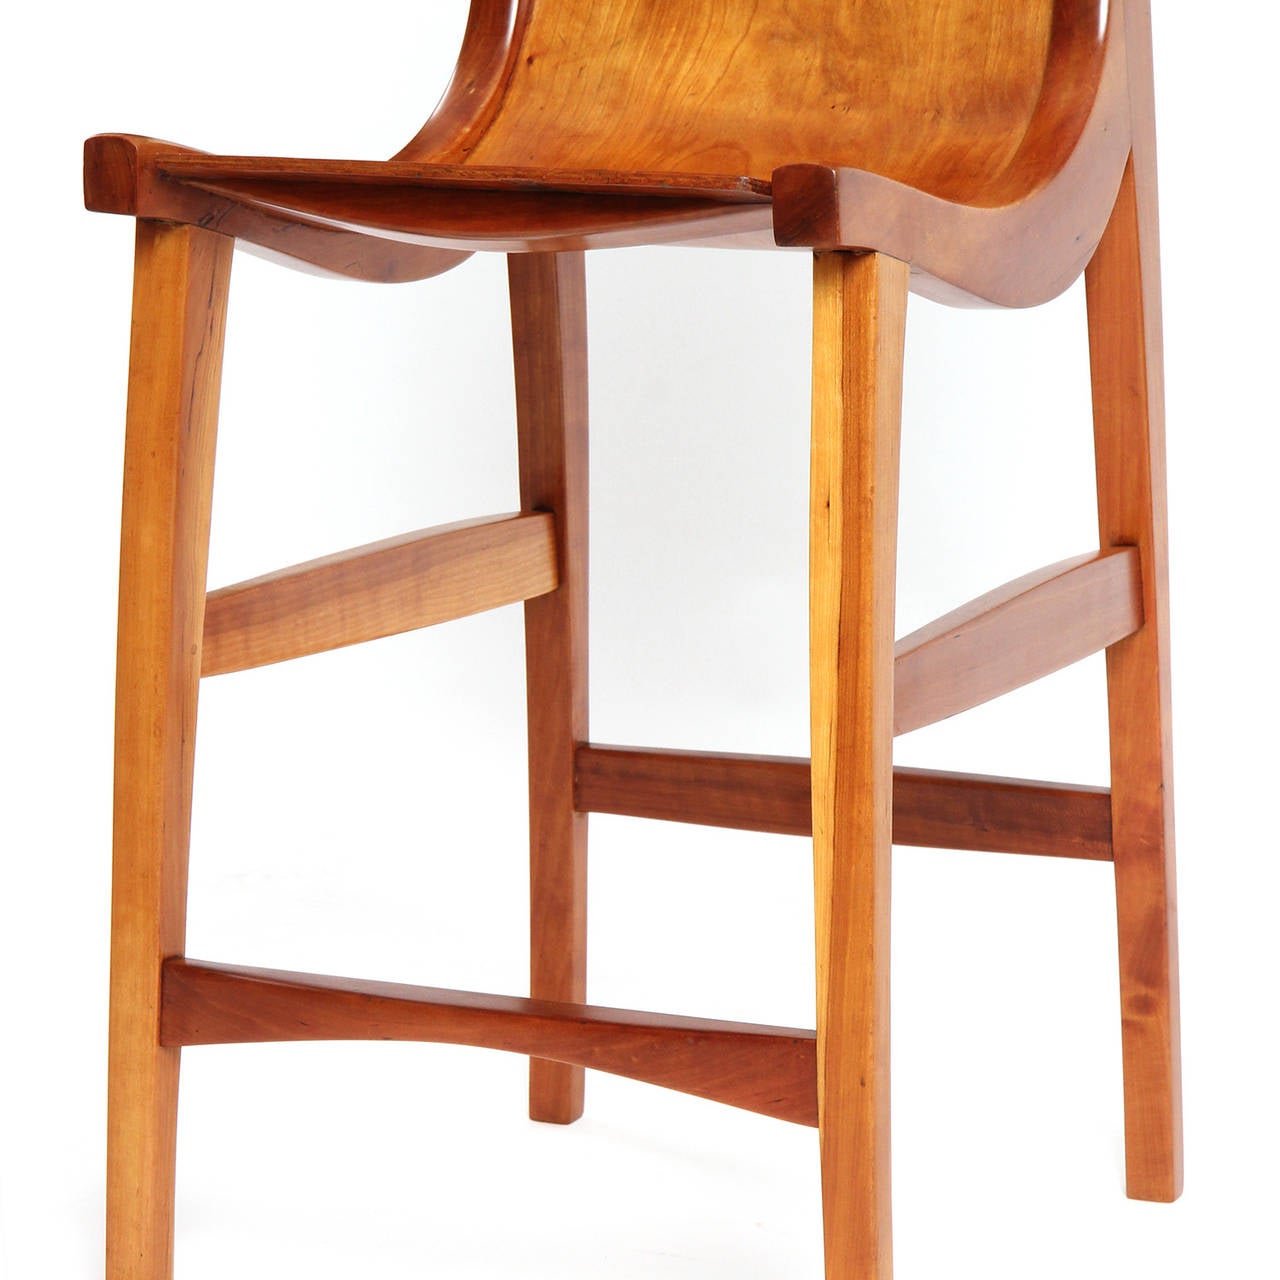 Mid-20th Century Pair of Sculptural High Chairs by Jere Osgood